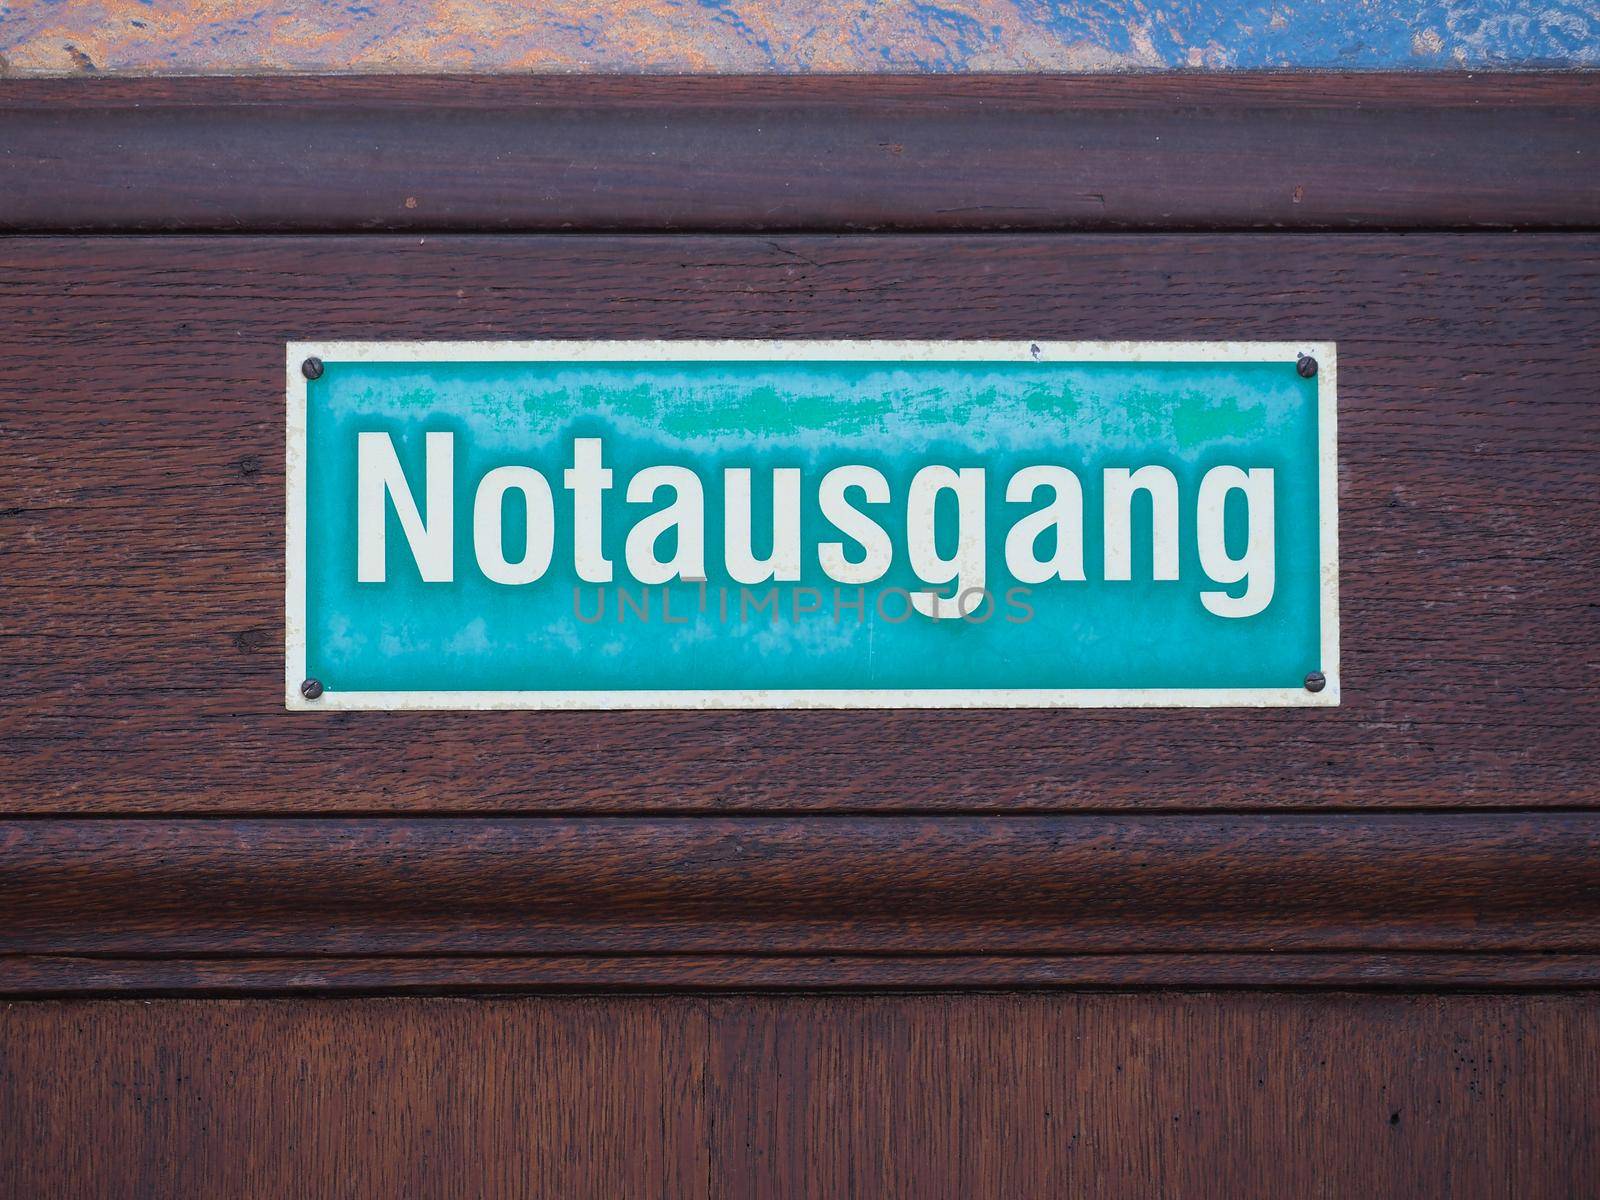 Notausgang translation Emergency exit sign by claudiodivizia